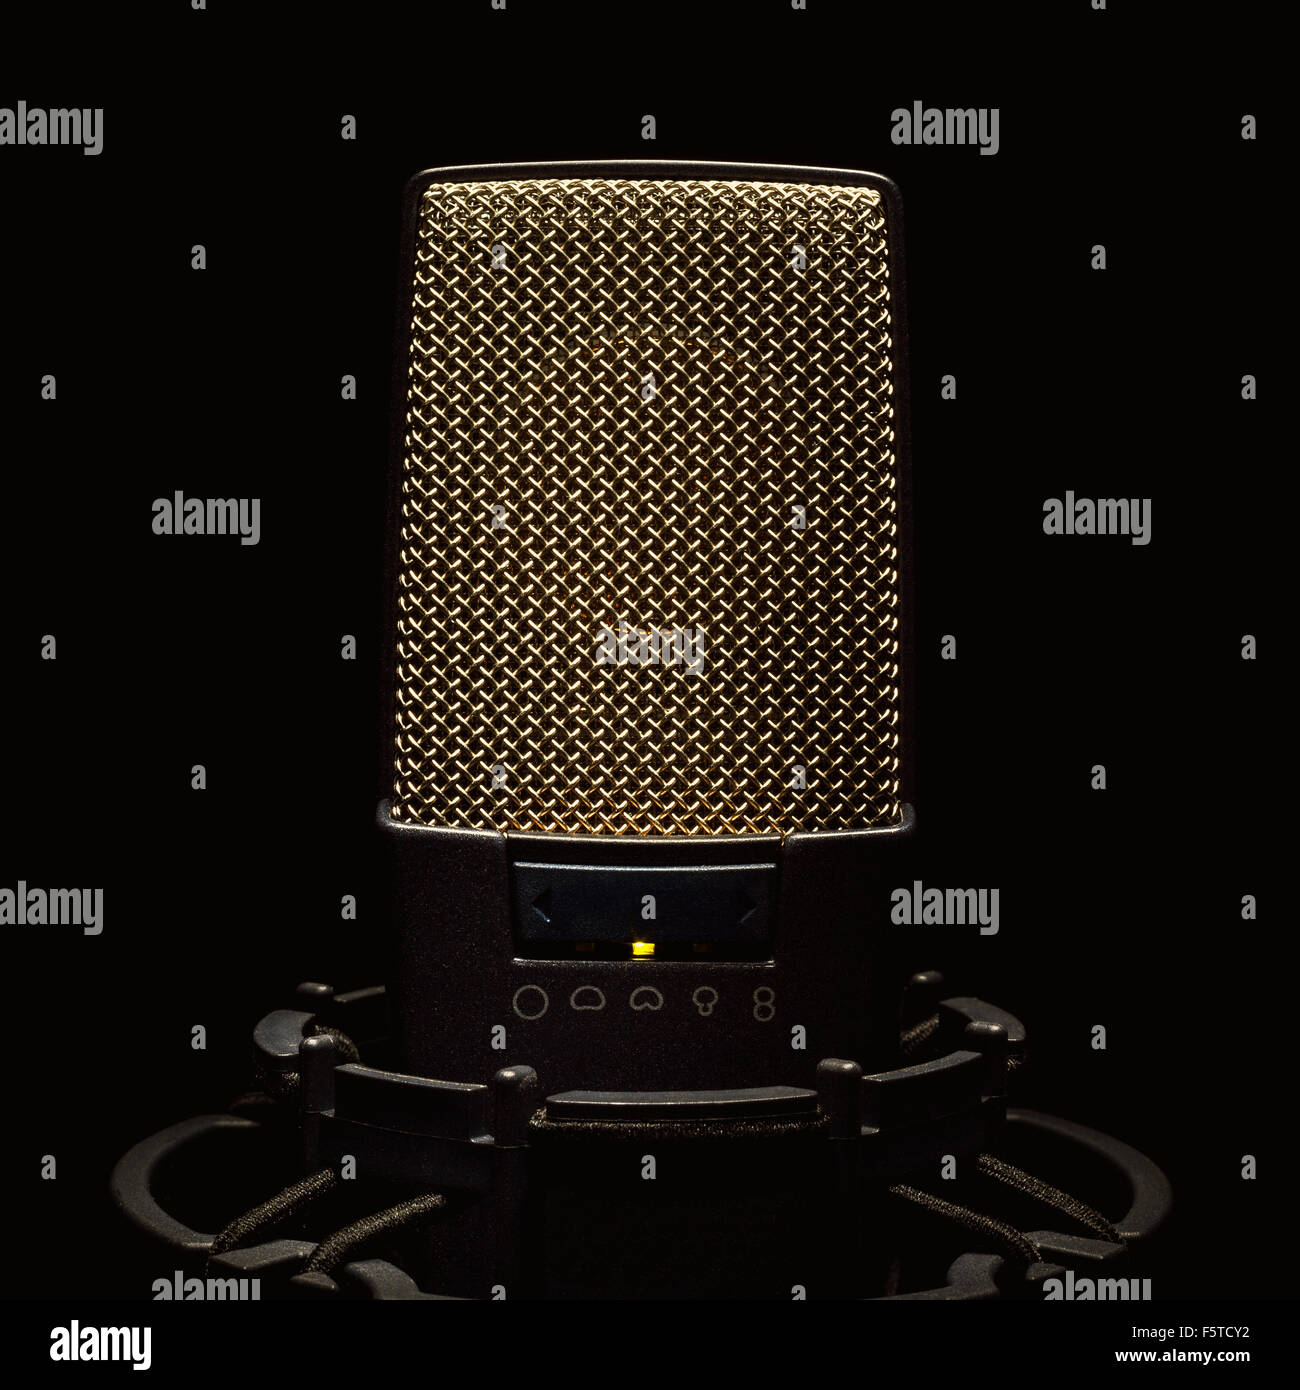 Black modern microphone on stand, black dark background. Accentuated shapes with light. Stock Photo